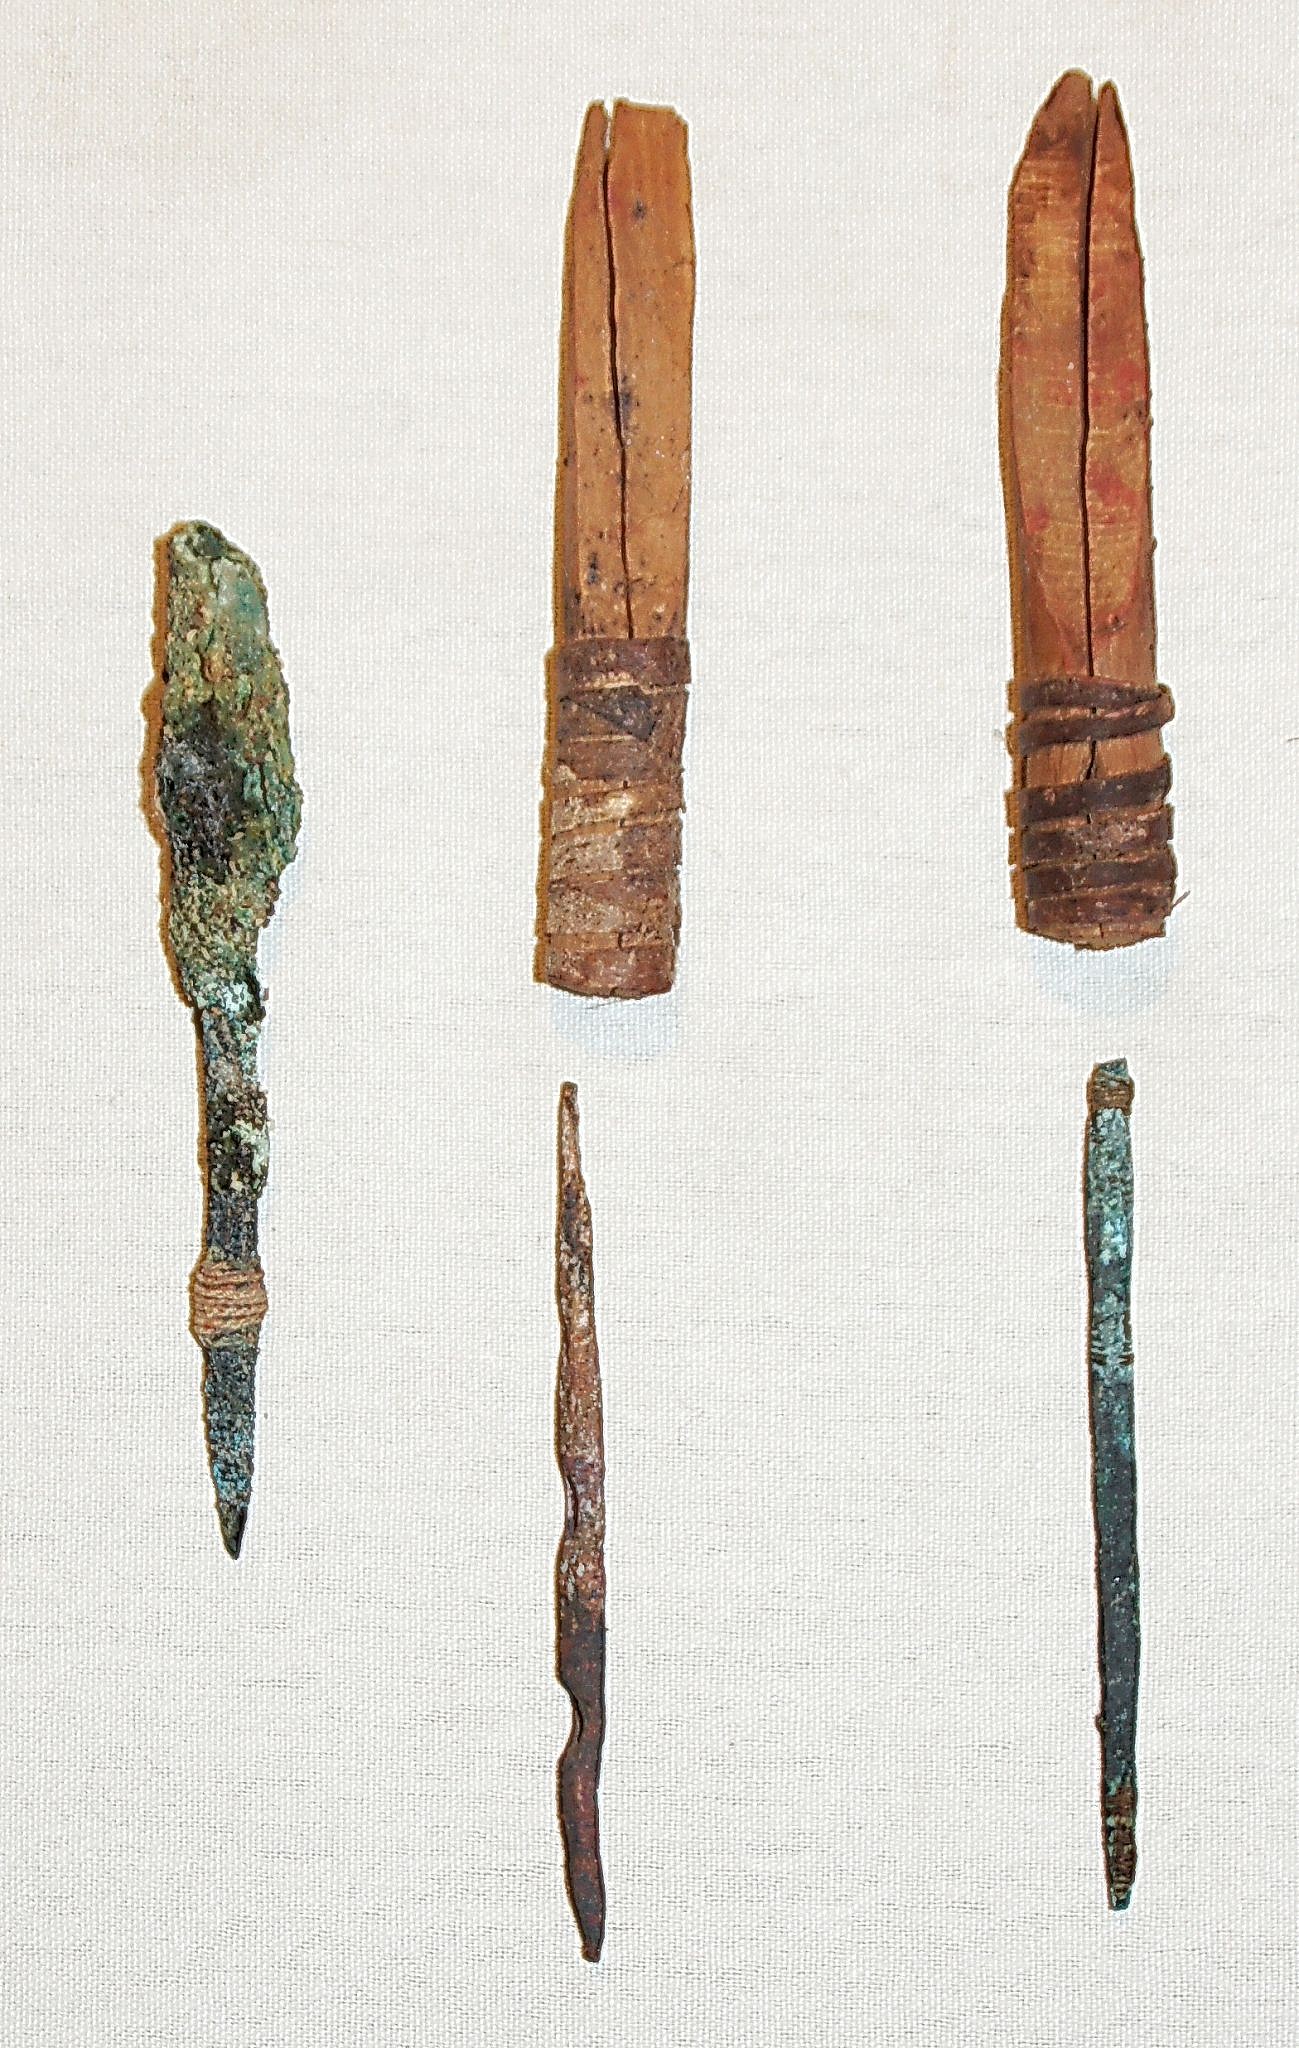 Chile, Three Copper Drill Bits and Two Wood Drill Chucks
Wood drill chucks were split lengthwise and cut on a bevel, the wrapped with together with gut.  A copper drill bit was inserted into the chuck and tightened gut.  The beveled end was attached to a beveled wooden shaft and worked with a bow drill.
Media: Wood
Dimensions: Length: 2.5"
n6027